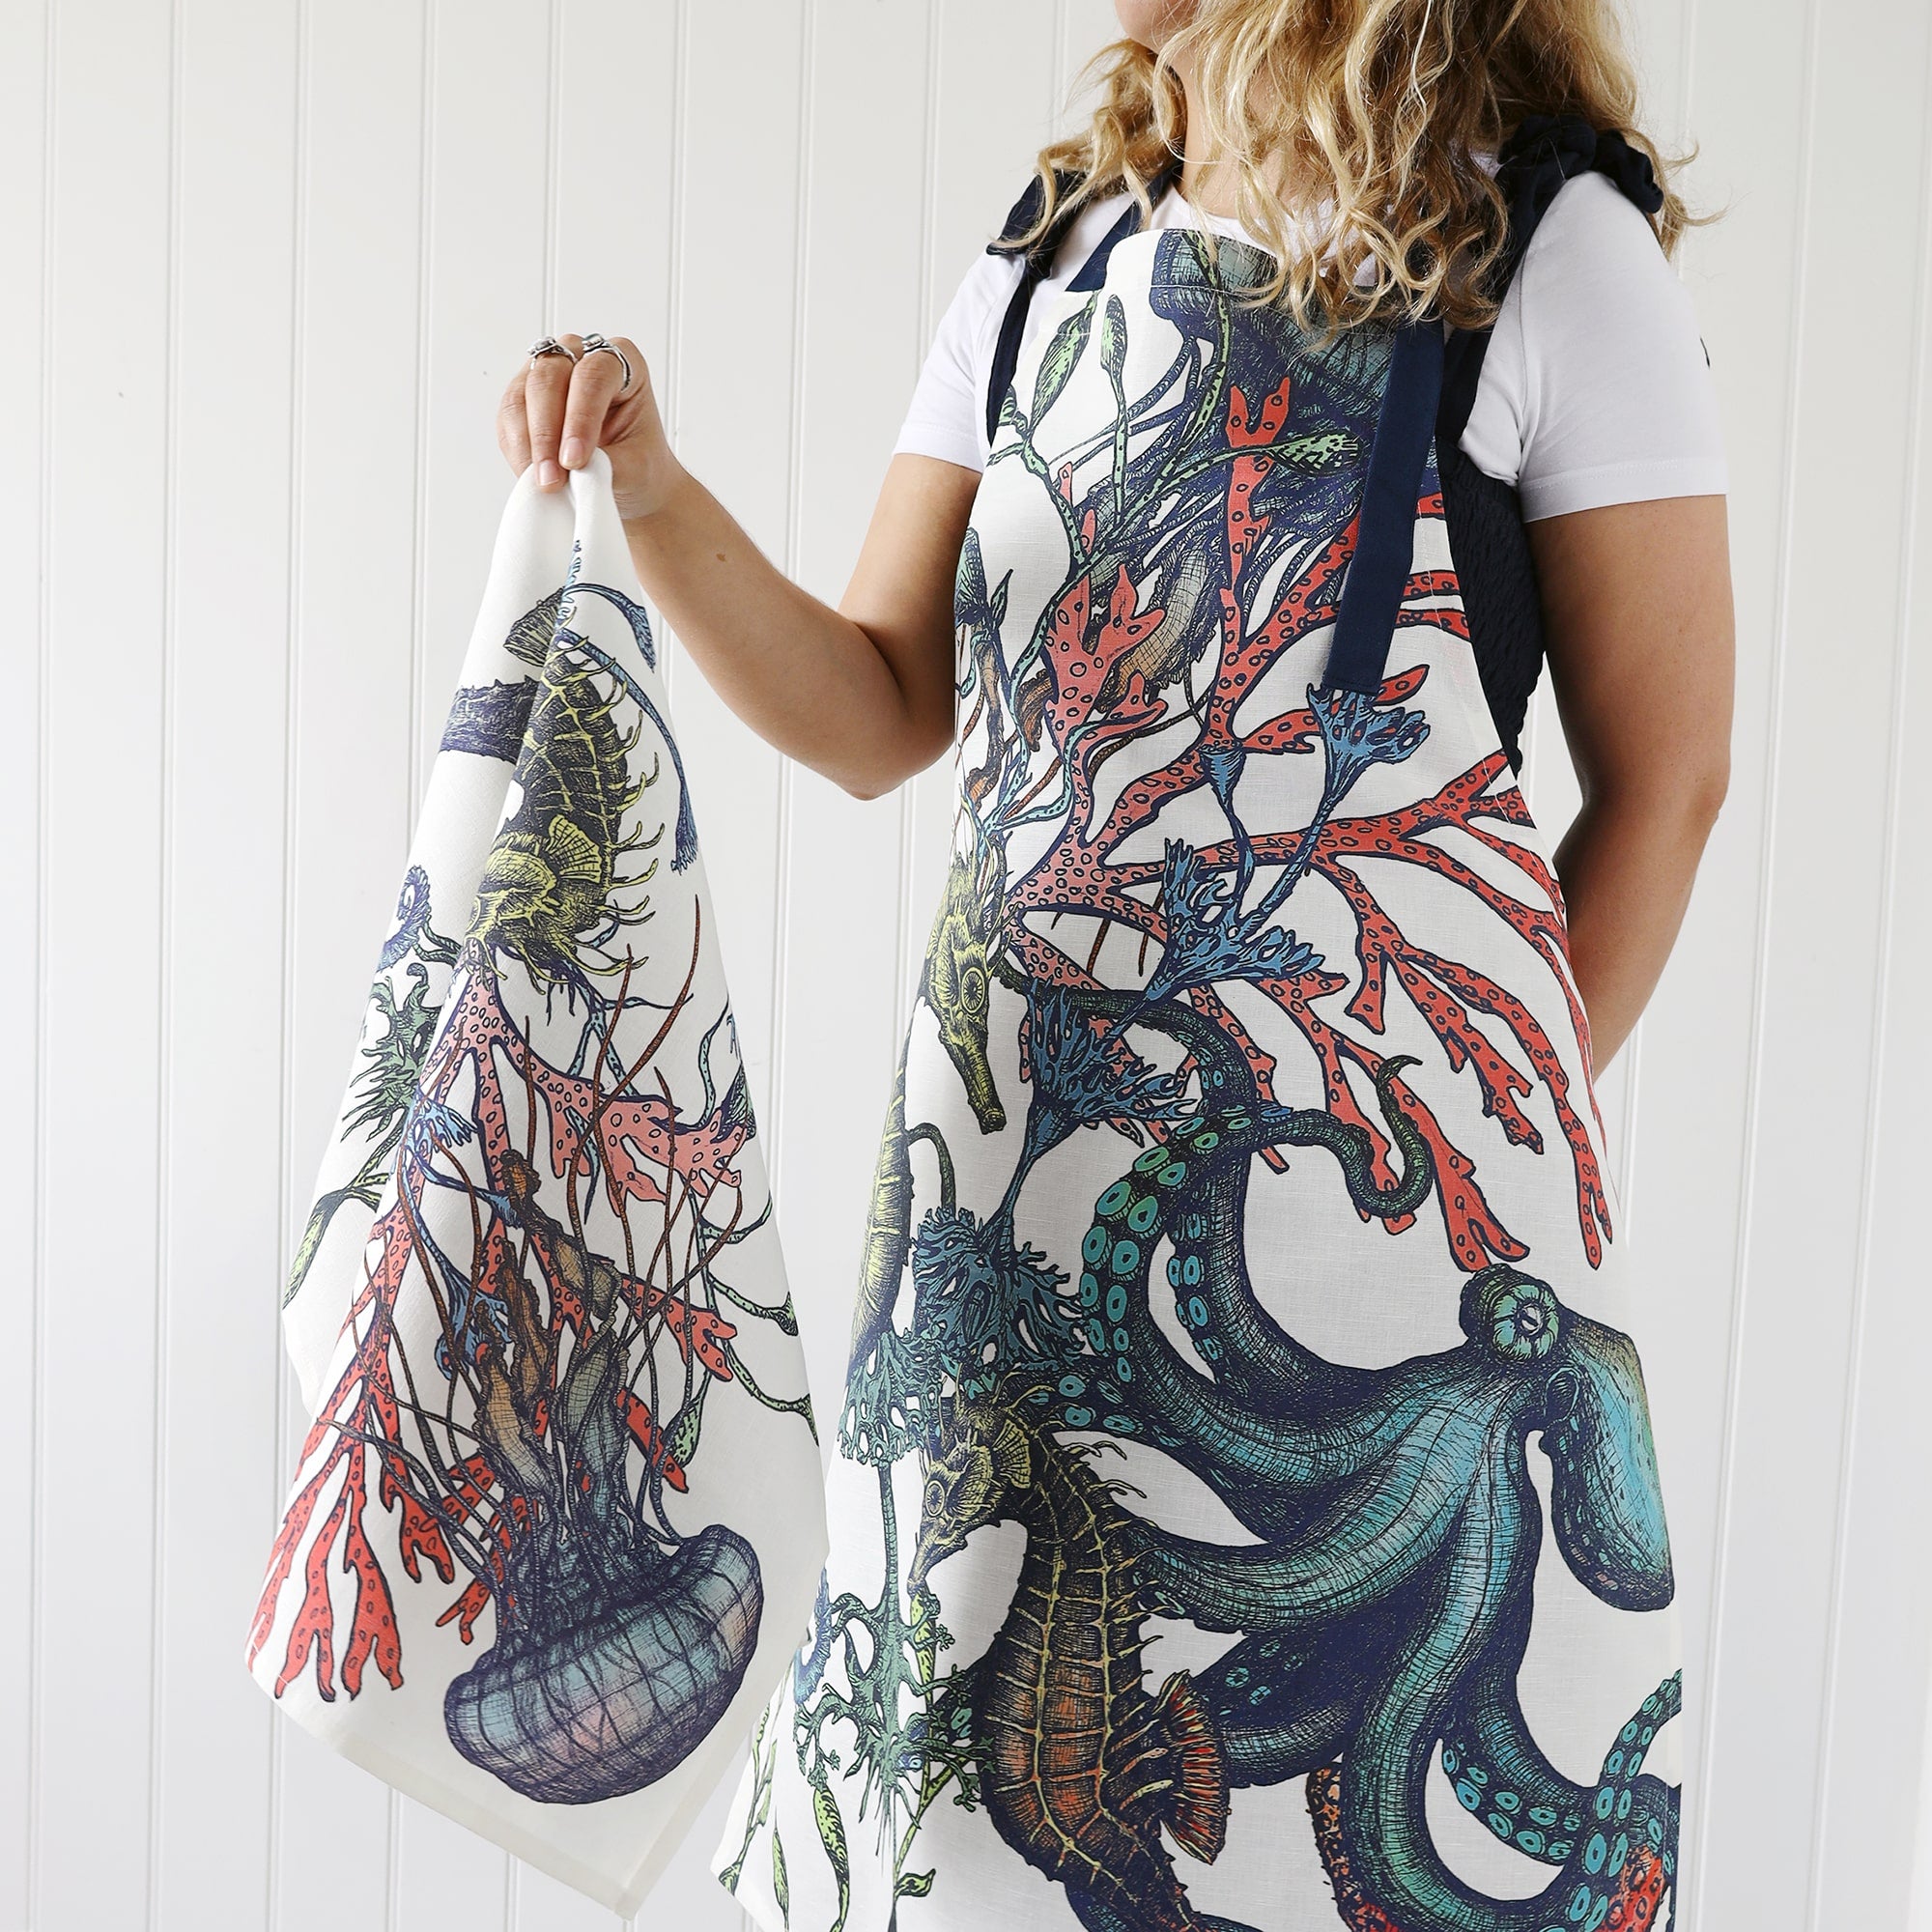 Our reef apron being worn by a model who is also holding a reef tea towel